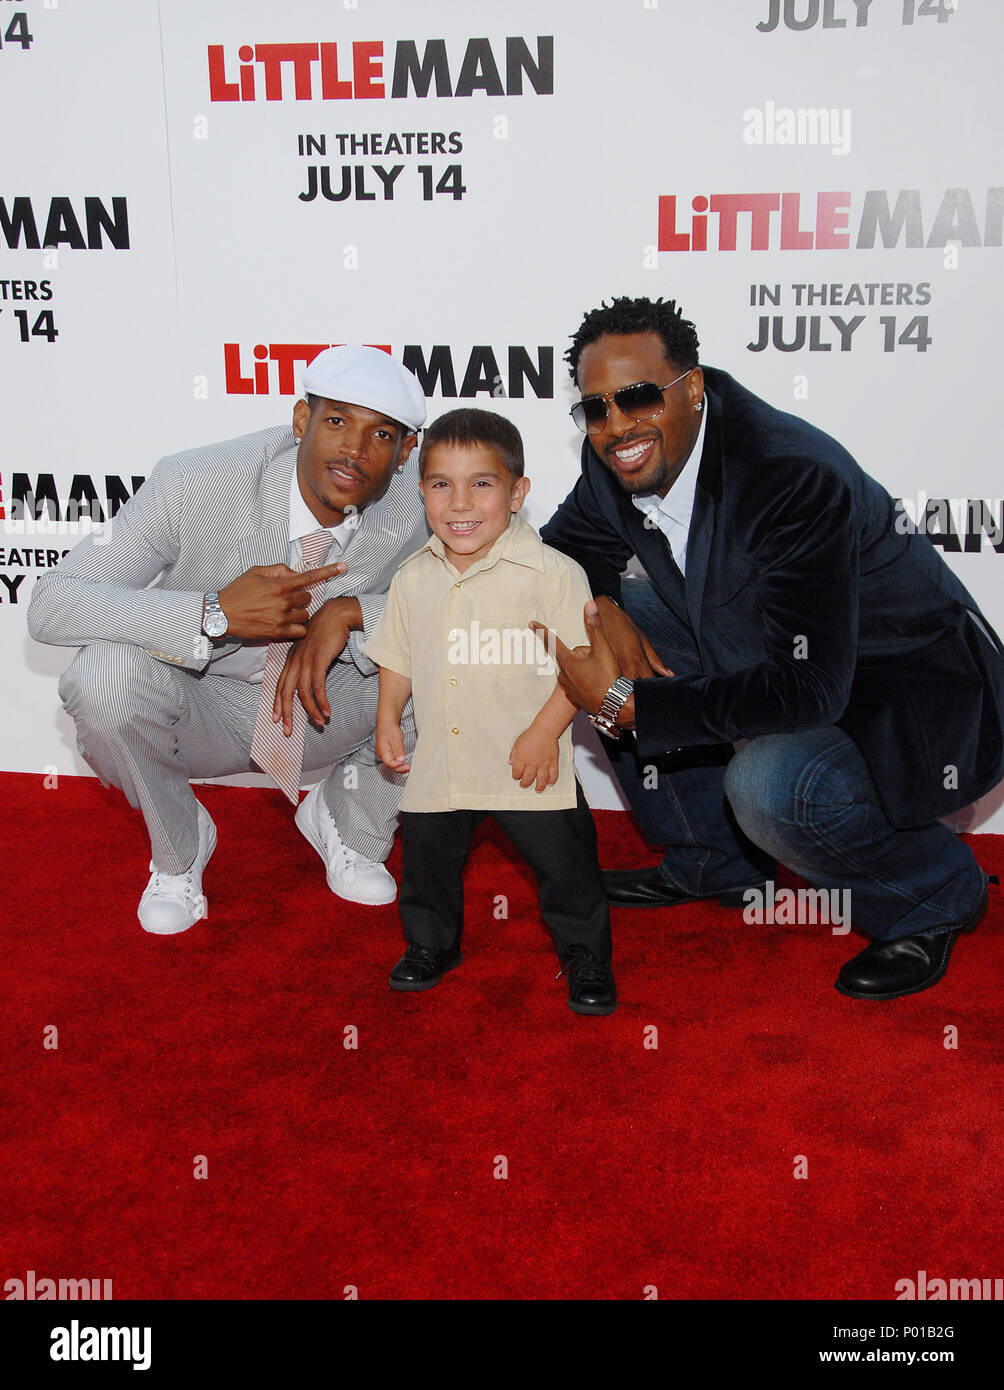 Shawn Wayans with brother Marlon and Gabe Pimentel  arriving at the LITTLE MAN Premiere at the National Theatre  In Los Angeles. July 6,  2006.WayansM Shawn PimentalGabe22  Event in Hollywood Life - California, Red Carpet Event, USA, Film Industry, Celebrities, Photography, Bestof, Arts Culture and Entertainment, Celebrities fashion, Best of, Hollywood Life, Event in Hollywood Life - California, Red Carpet and backstage, Music celebrities, Topix, Couple, family ( husband and wife ) and kids- Children, brothers and sisters inquiry tsuni@Gamma-USA.com, Credit Tsuni / USA, 2006 to 2009 Stock Photo